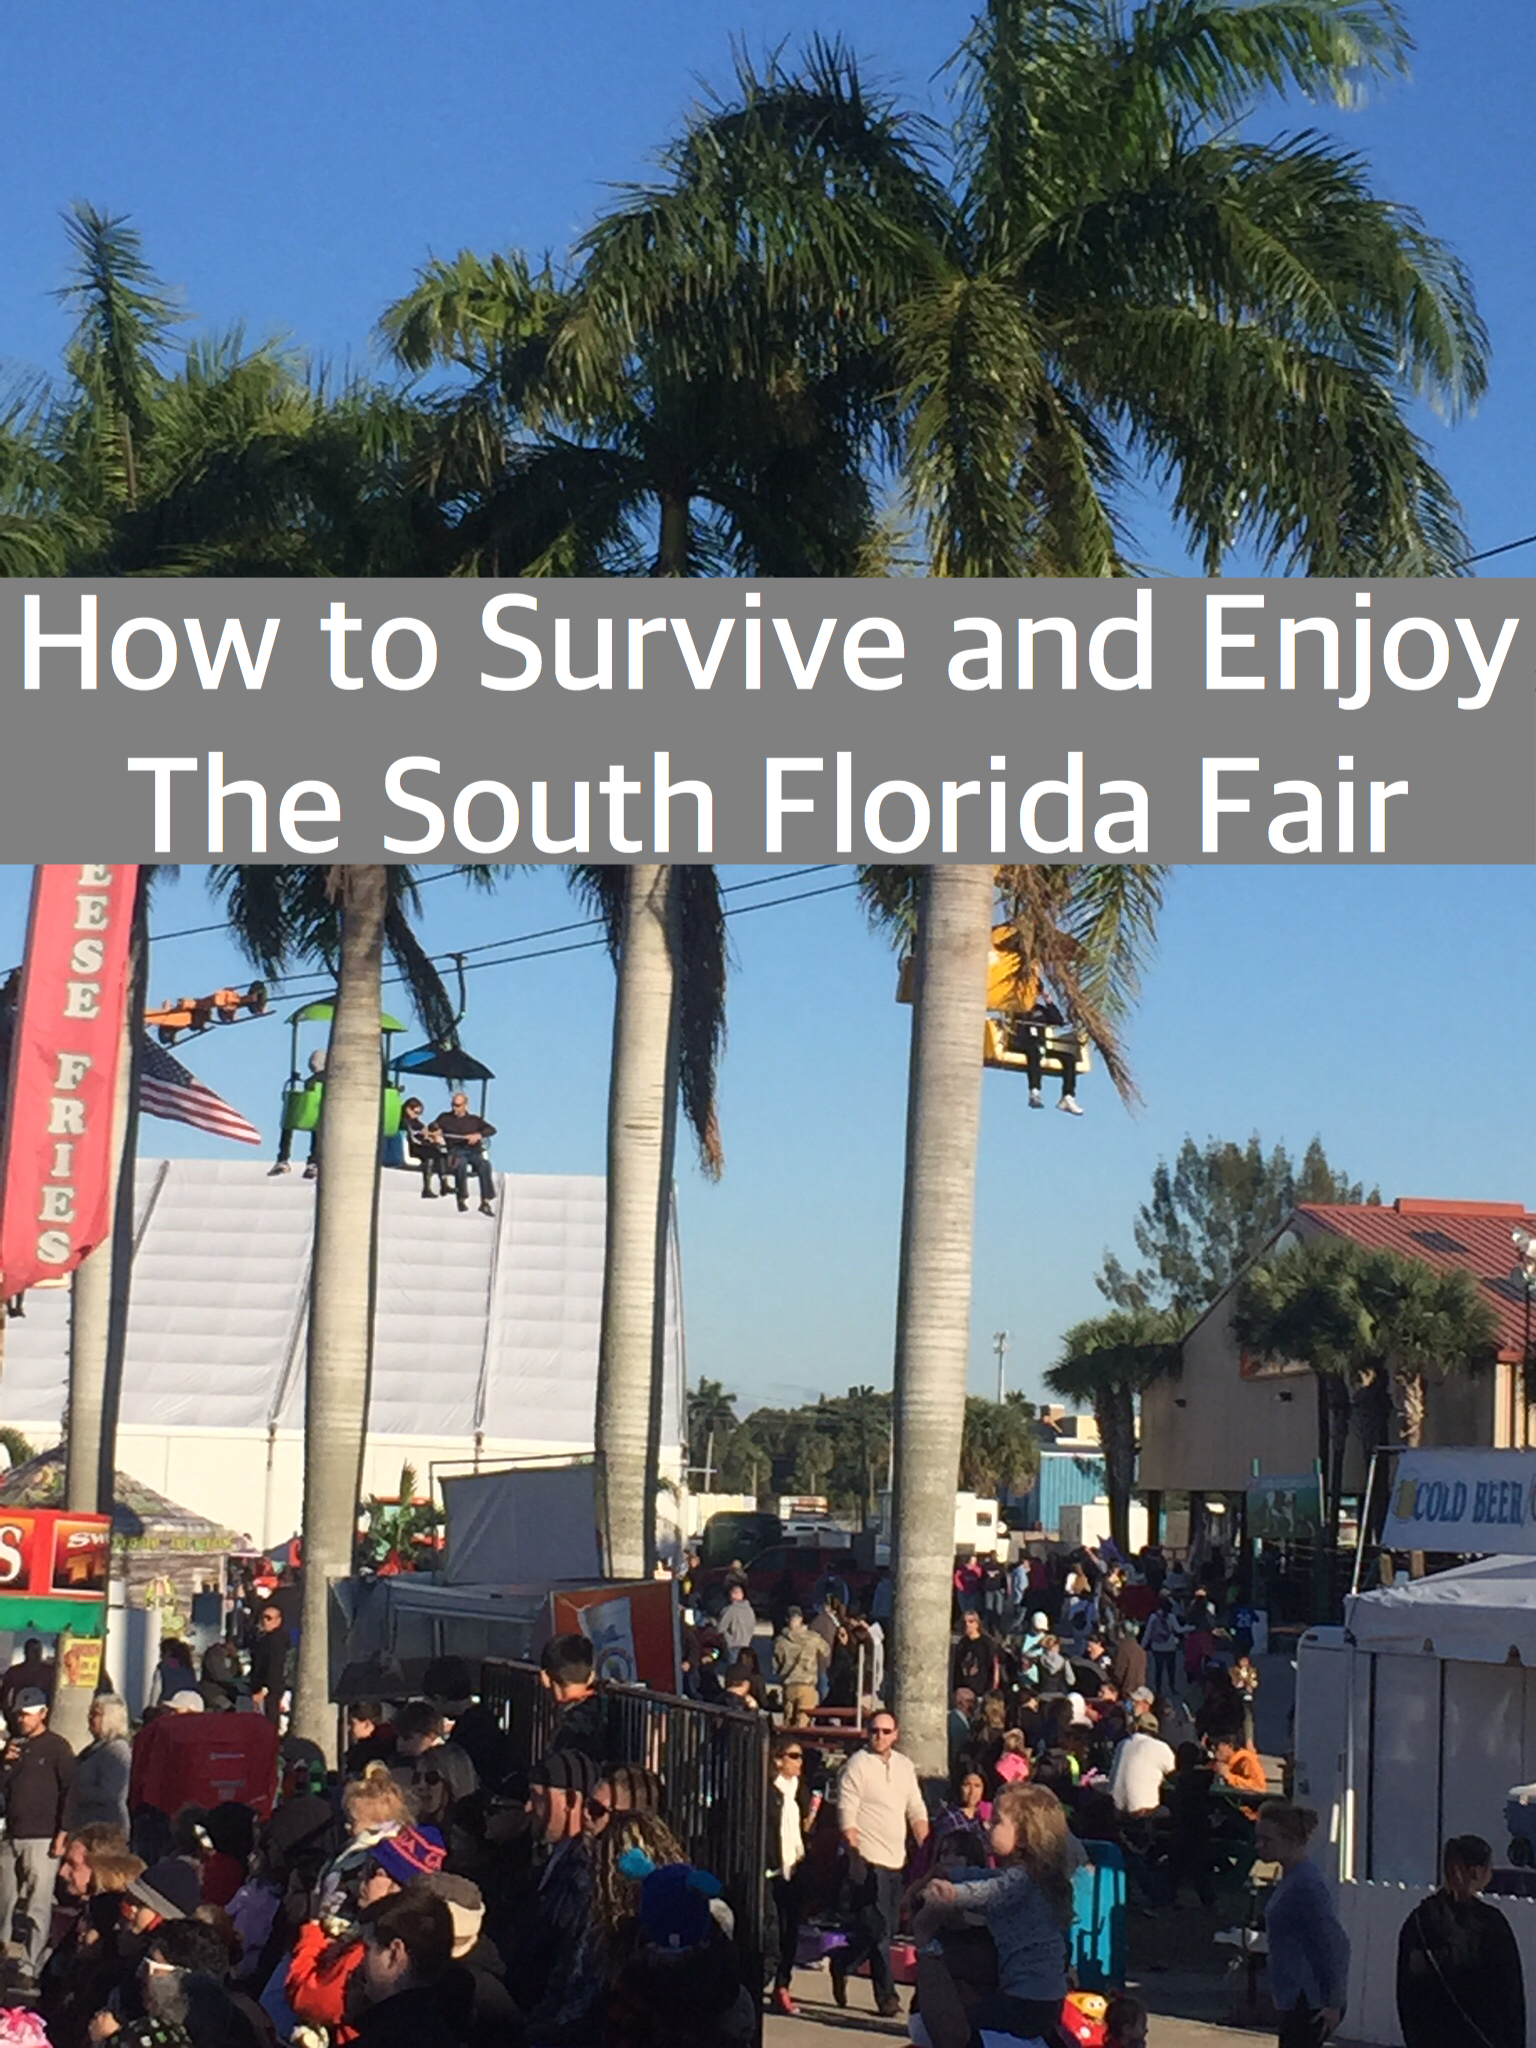 The South Florida Fair by Happy Family Blog